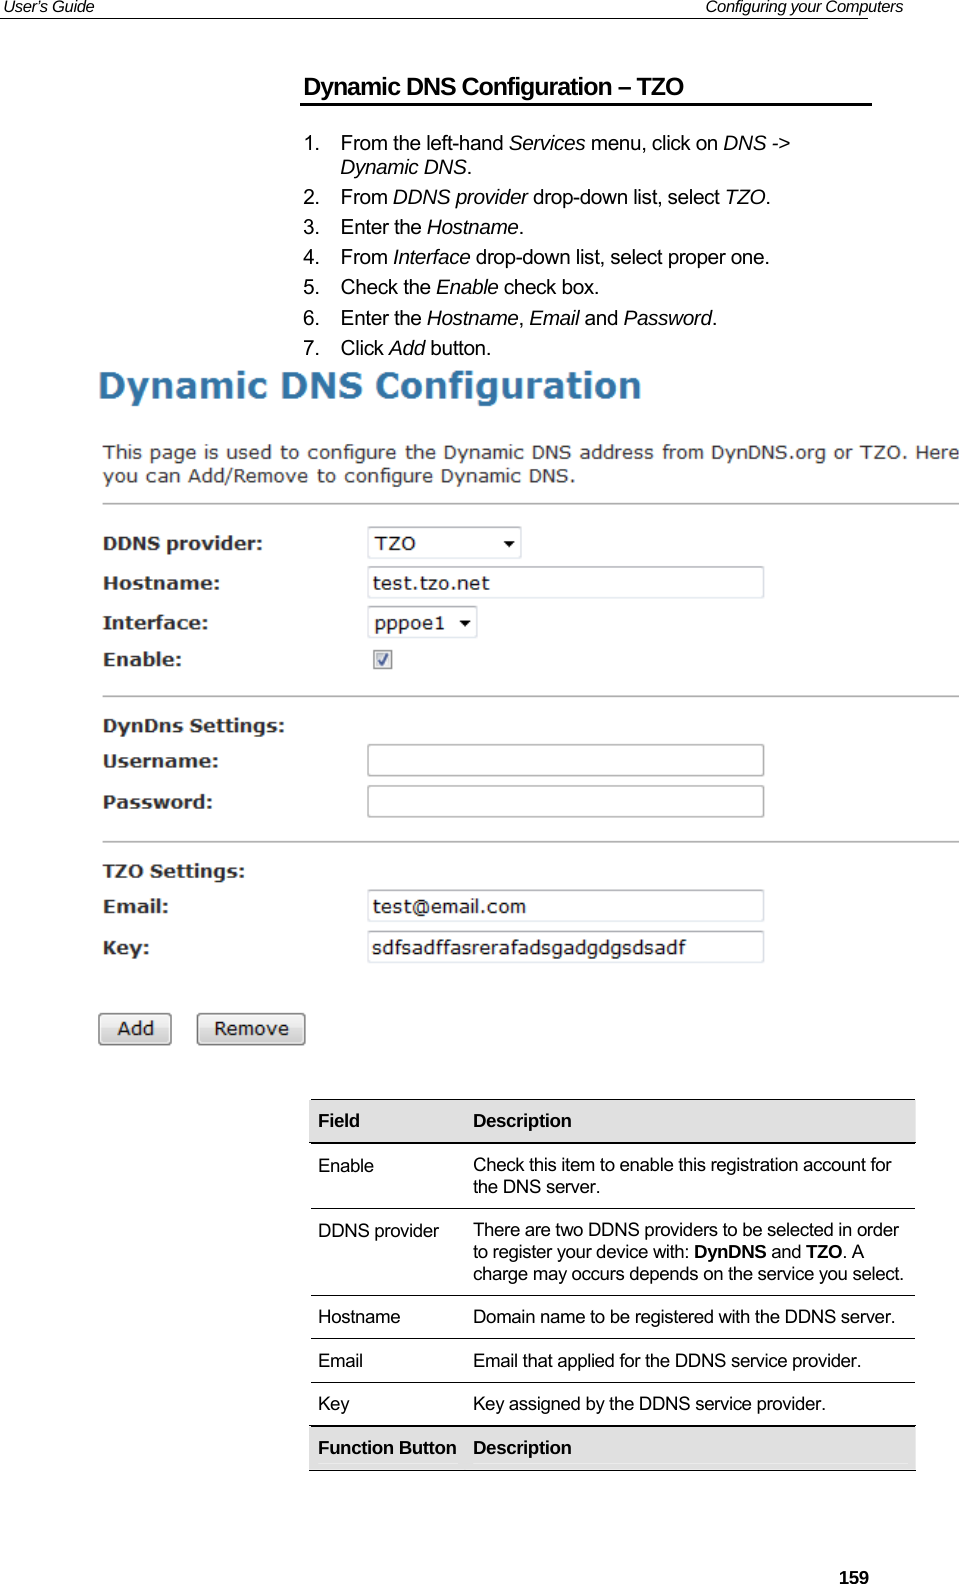 User’s Guide   Configuring your Computers Dynamic DNS Configuration – TZO 1.  From the left-hand Services menu, click on DNS -&gt; O. e. 4. From Interface drop-down list, select proper one. 5. Check the Enable check box. 6. Enter the Hostname, Email and Password. 7. Click Add button. Dynamic DNS. 2. From DDNS provider drop-down list, select TZ3. Enter the Hostnam          Field  Description Enable  Check this item to enable this registration account for the DNS server. DDNS pro   vider  rder charge may occurs depends on the service you select.There are two DDNS providers to be selected in oto register your device with: DynDNS and TZO. A Hostname  Domain name to be registered with the DDNS server. Email  Email that applied for the DDNS service provider. Key  Key assigned by the DDNS service provider. Function Button Description  159